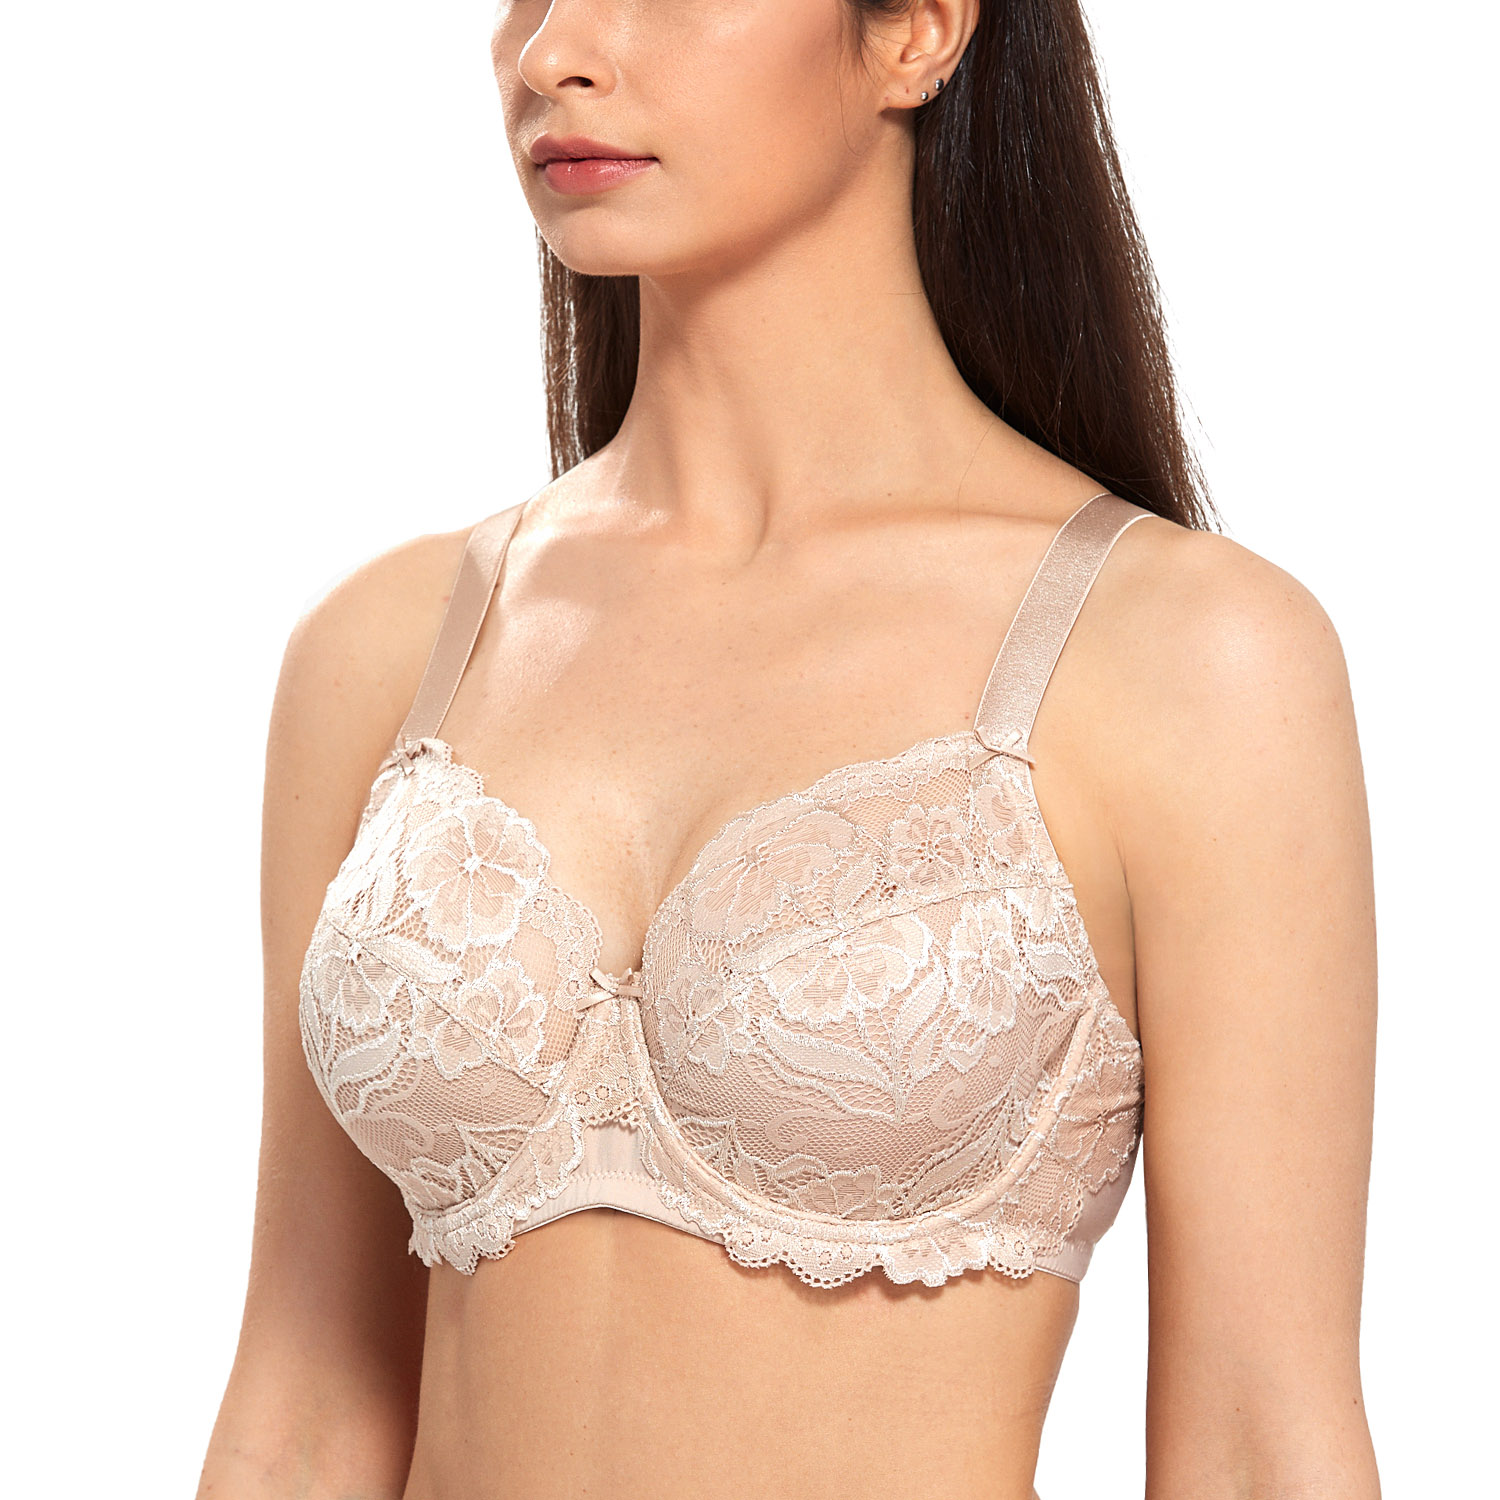  ZYLDDP Women's Bra Full Coverage Floral Lace Plus Size  Underwired Bra， A Daily Bra for All Seasons (Color : Naked Fan, Size : 34C)  : Clothing, Shoes & Jewelry